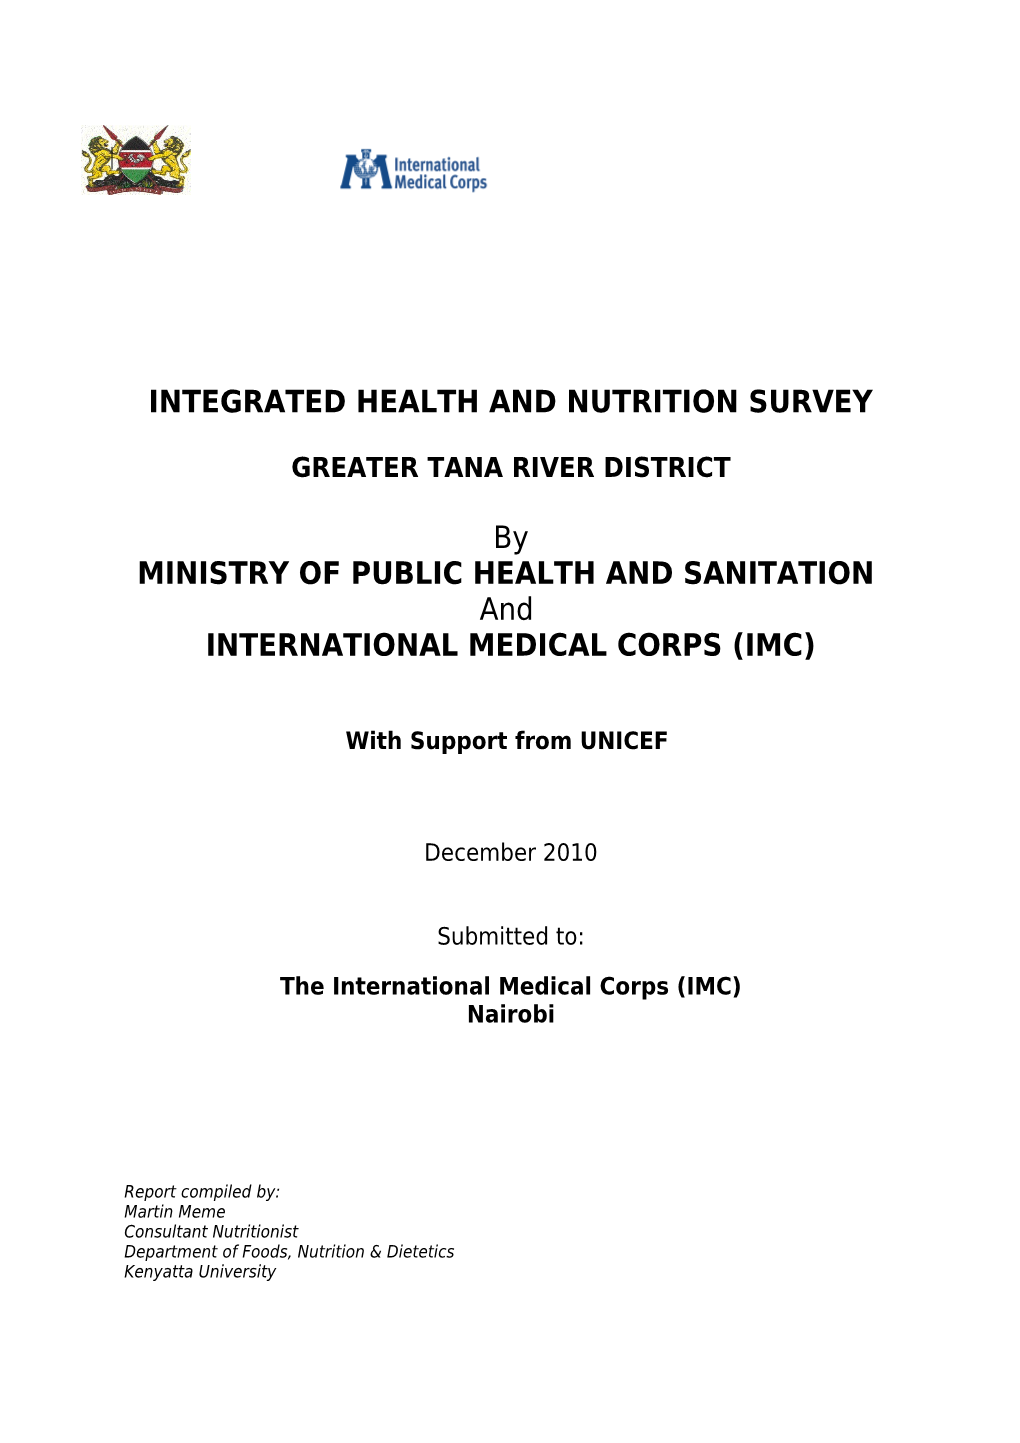 Integrated Health and Nutrition Survey